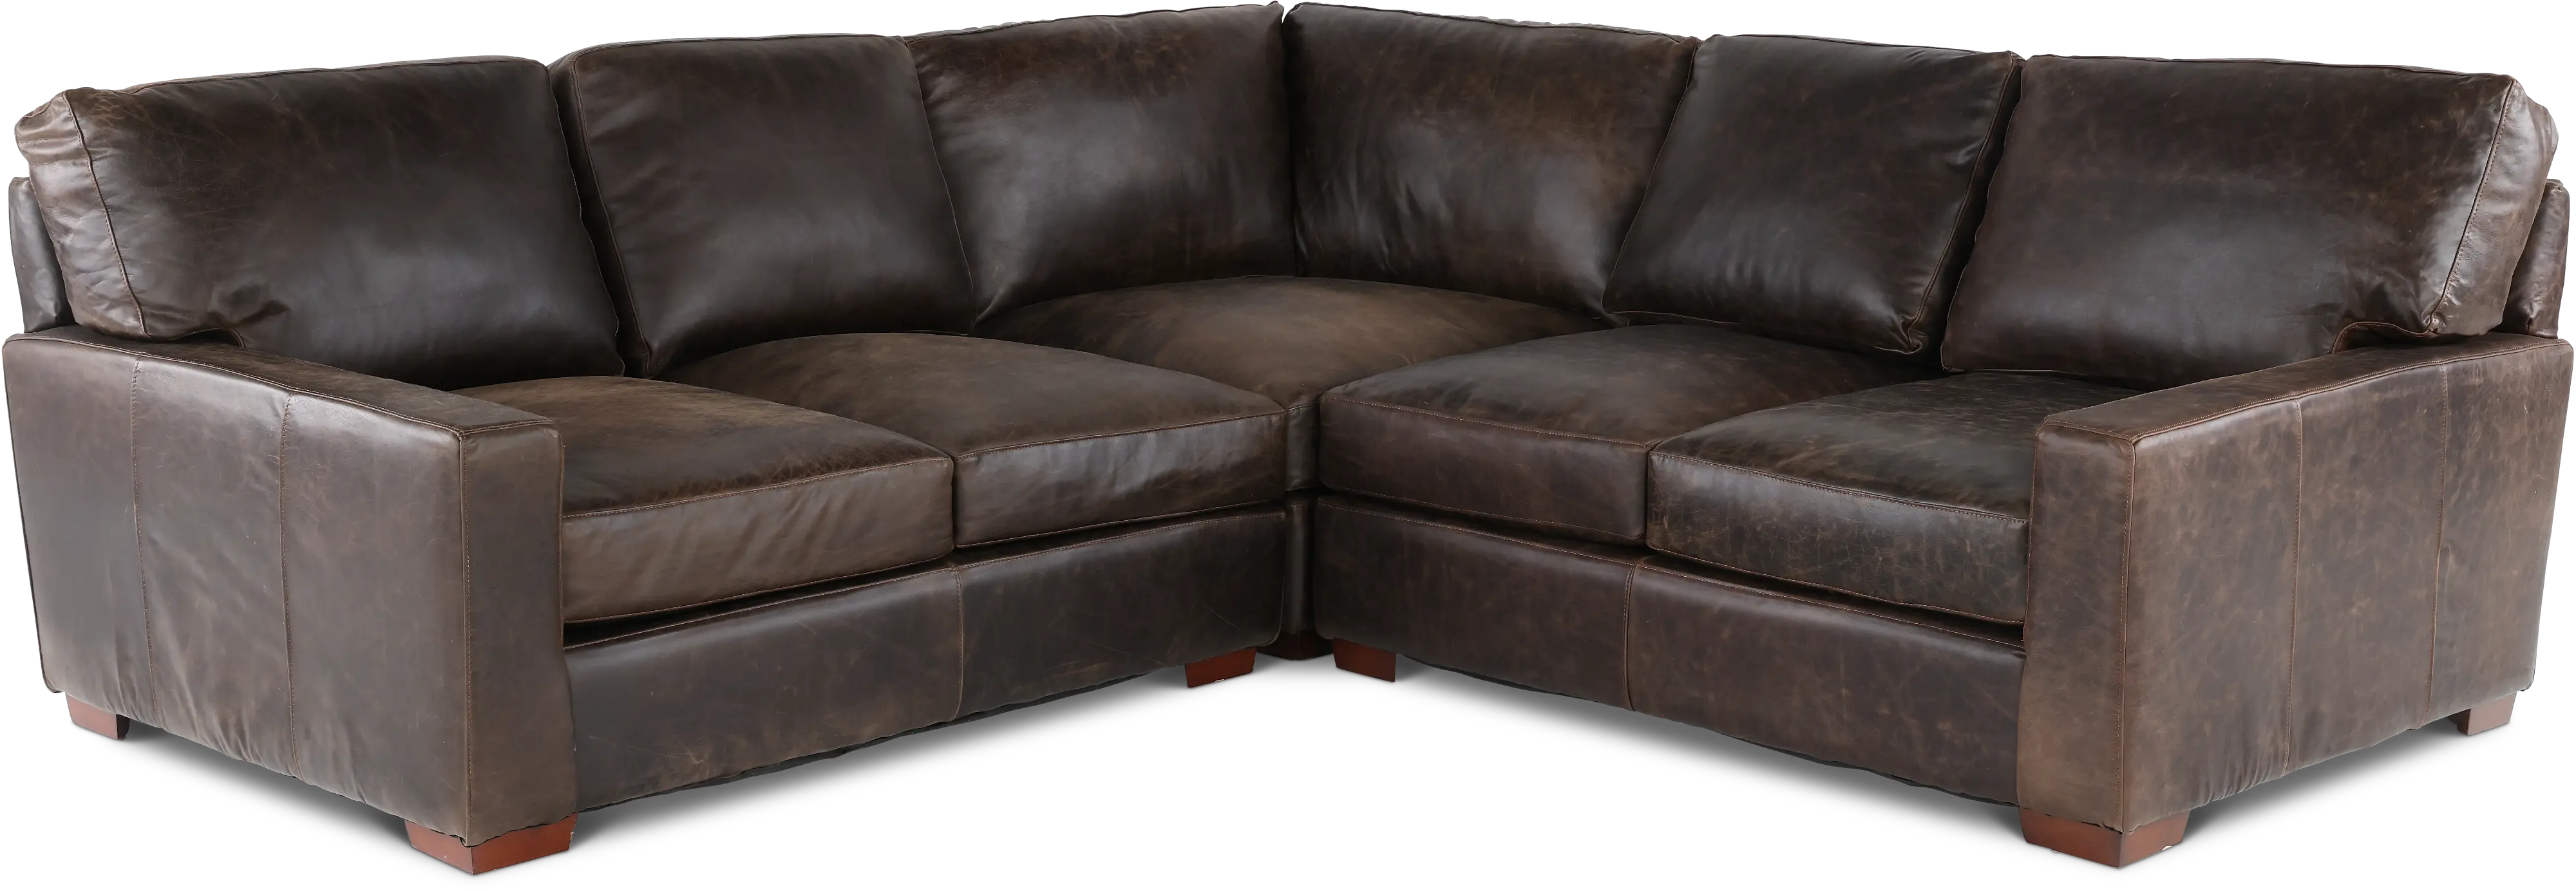 Mayfair Java Brown Leather 3 Piece Sectional